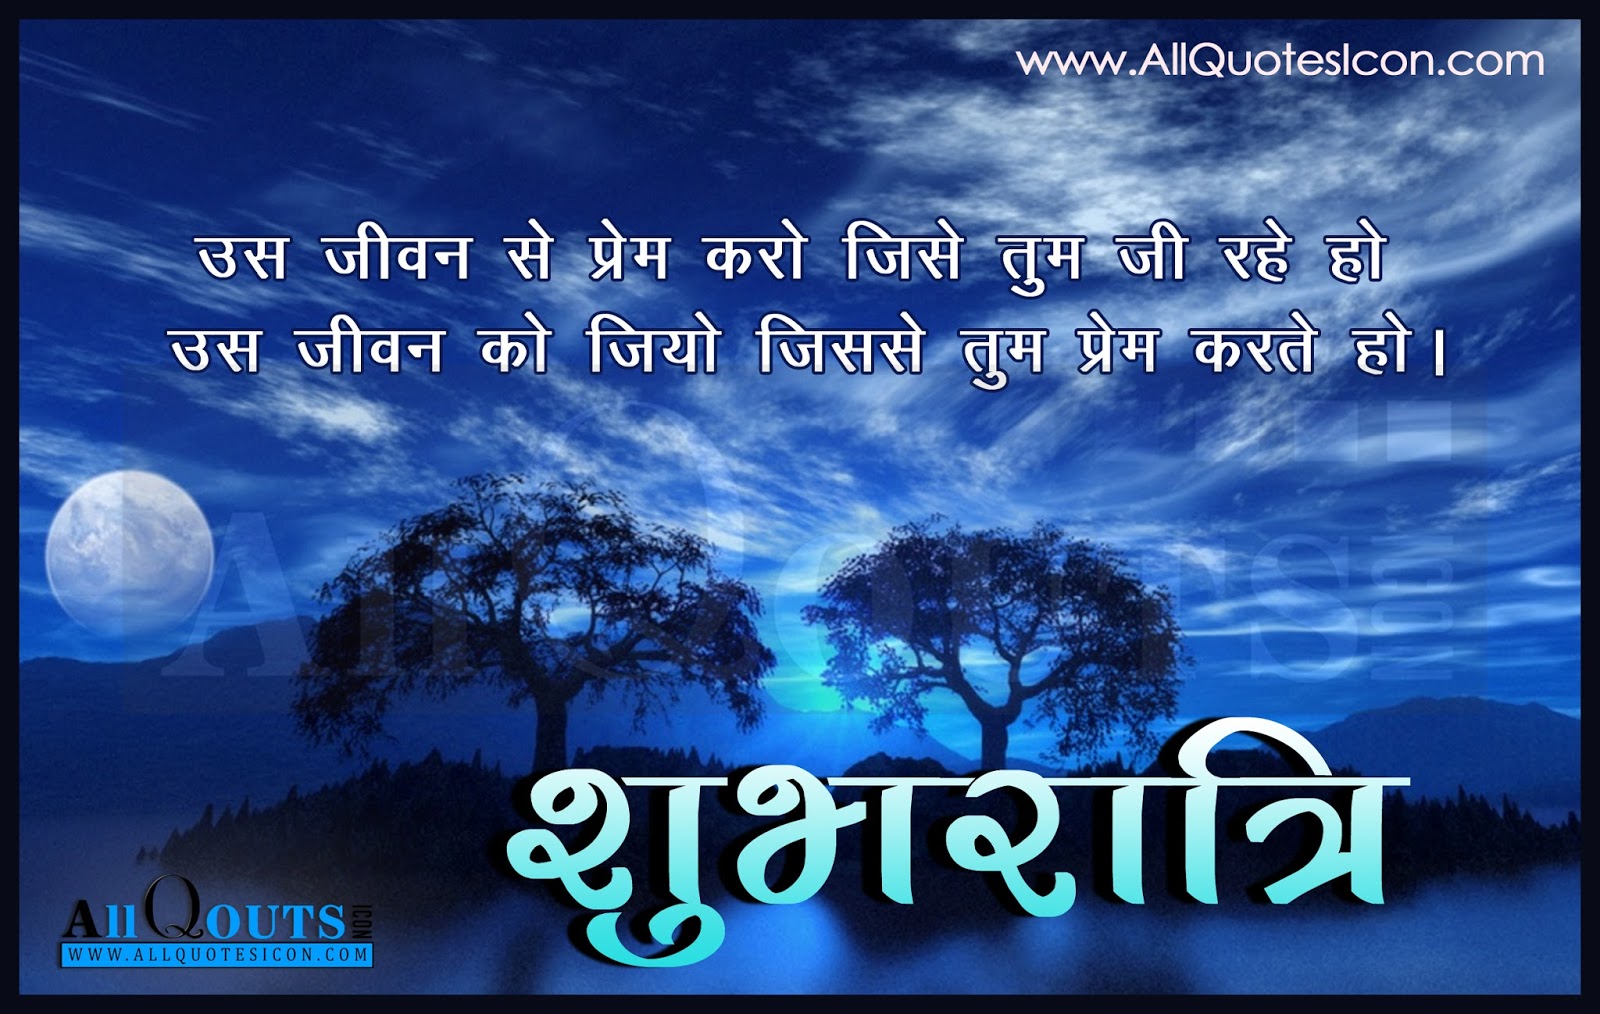 Good Night Anmol Vachan with Images - Shubh Ratri Wishes Messages